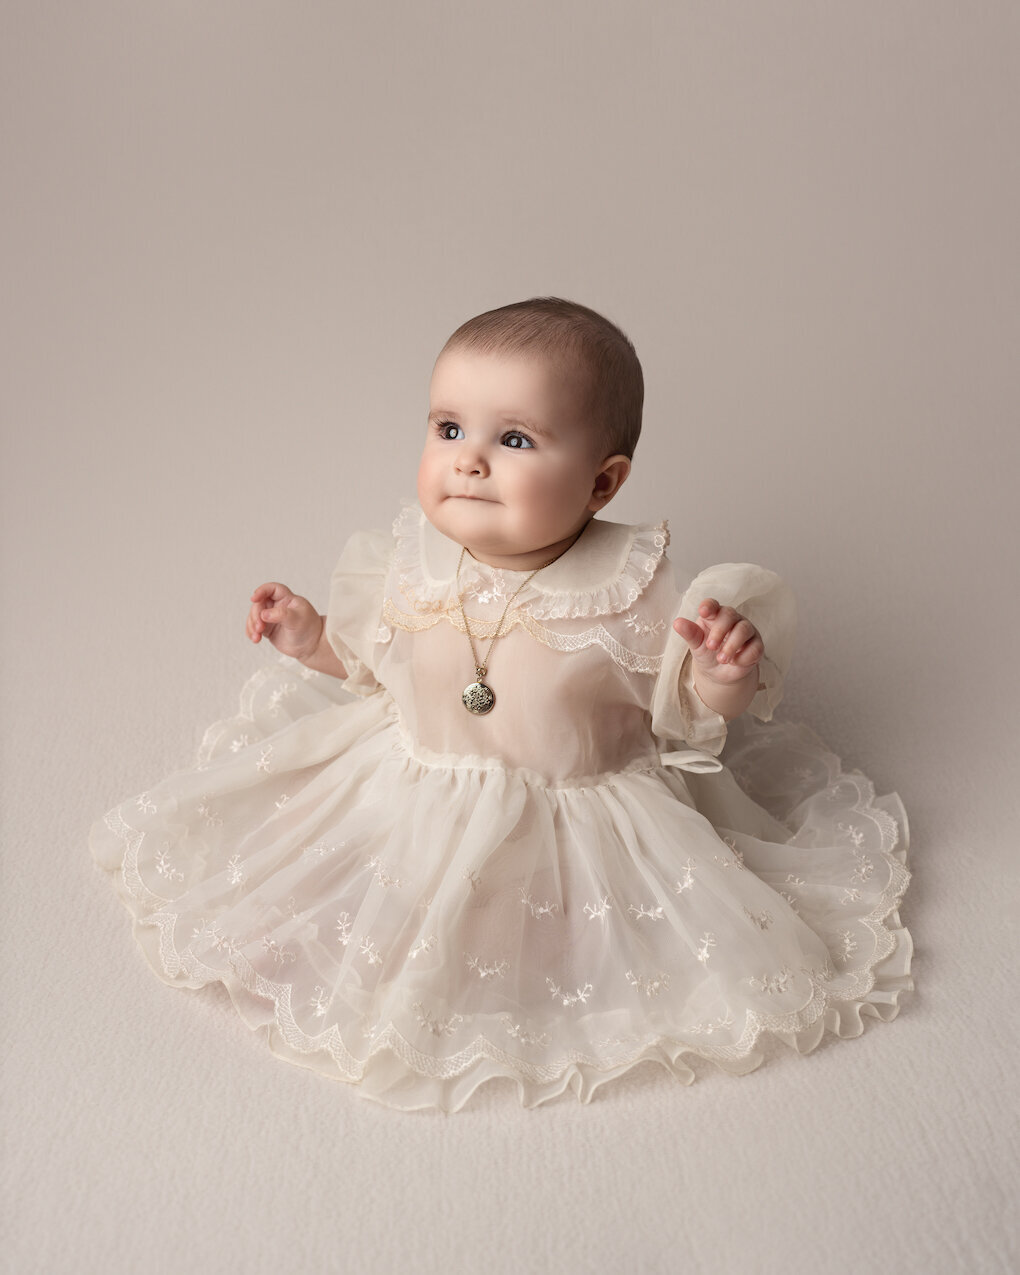 Baby girl heirloom vintage dress six months by for the love of photography brighton